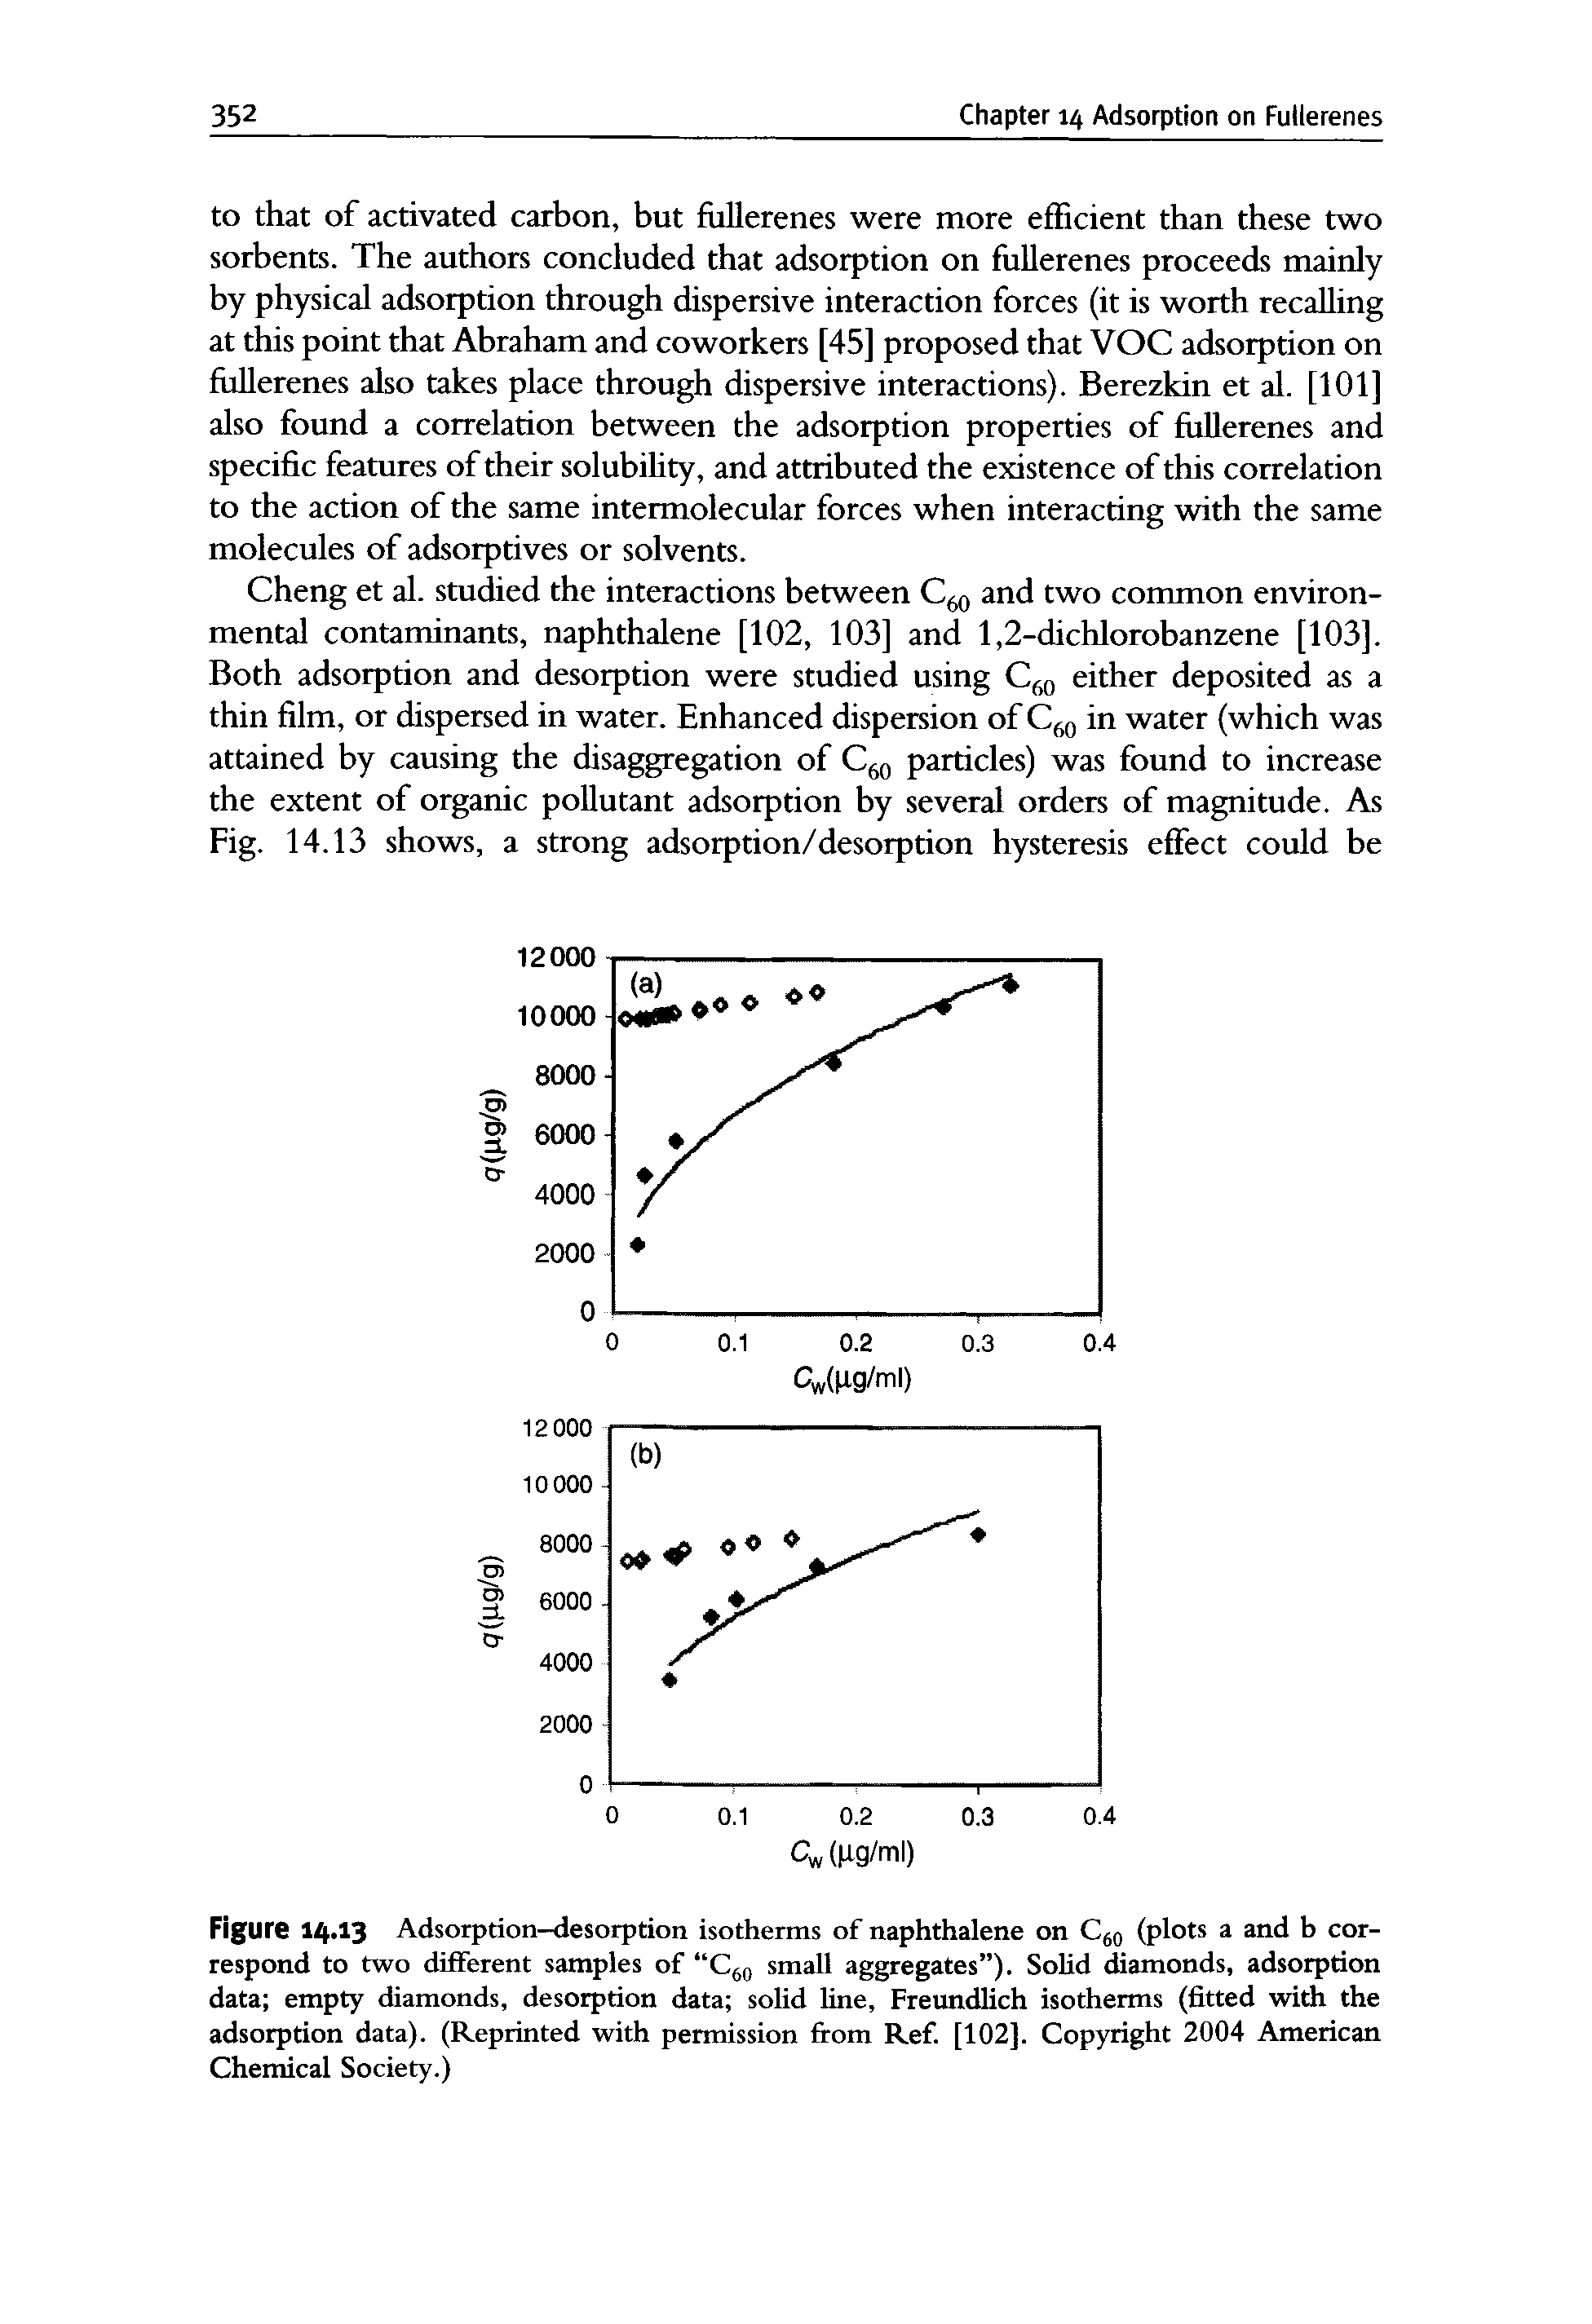 Figure 14.13 Adsorption-desorption isotherms of naphthalene on (plots a and b correspond to two different samples of C q small aggregates ). Solid diamonds, adsorption data empty diamonds, desorption data solid line, Freundlich isotherms (fitted with the adsorption data). (Reprinted with permission from Ref. [102]. Copyright 2004 American Chemical Society.)...